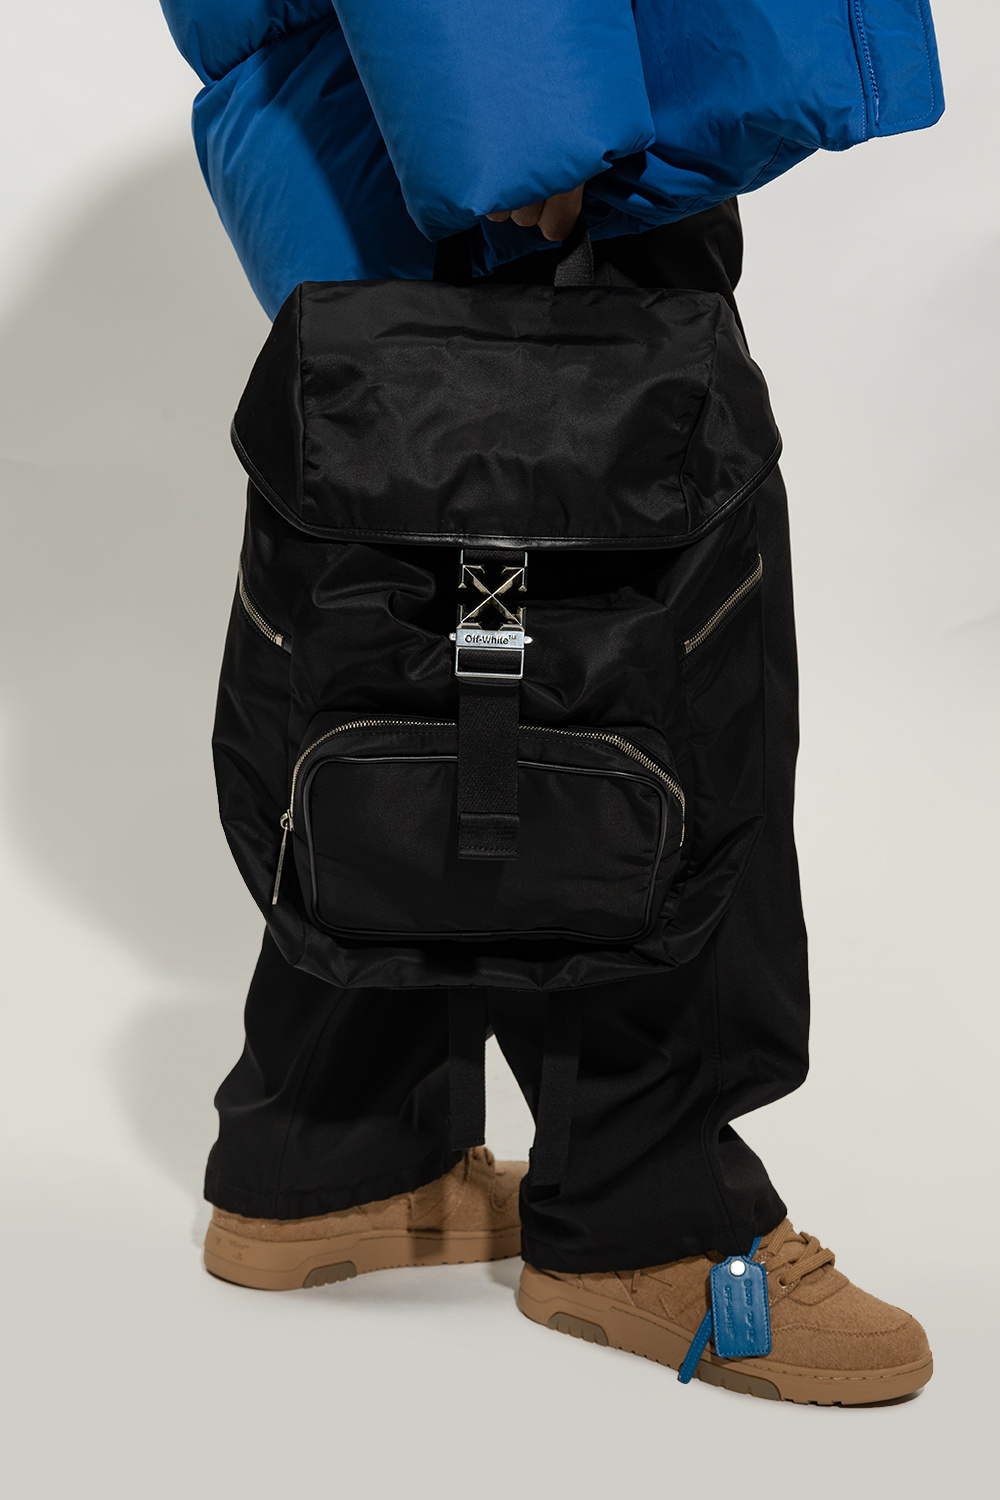 Off-White ‘Arrow Tuc’ nf3295dc backpack